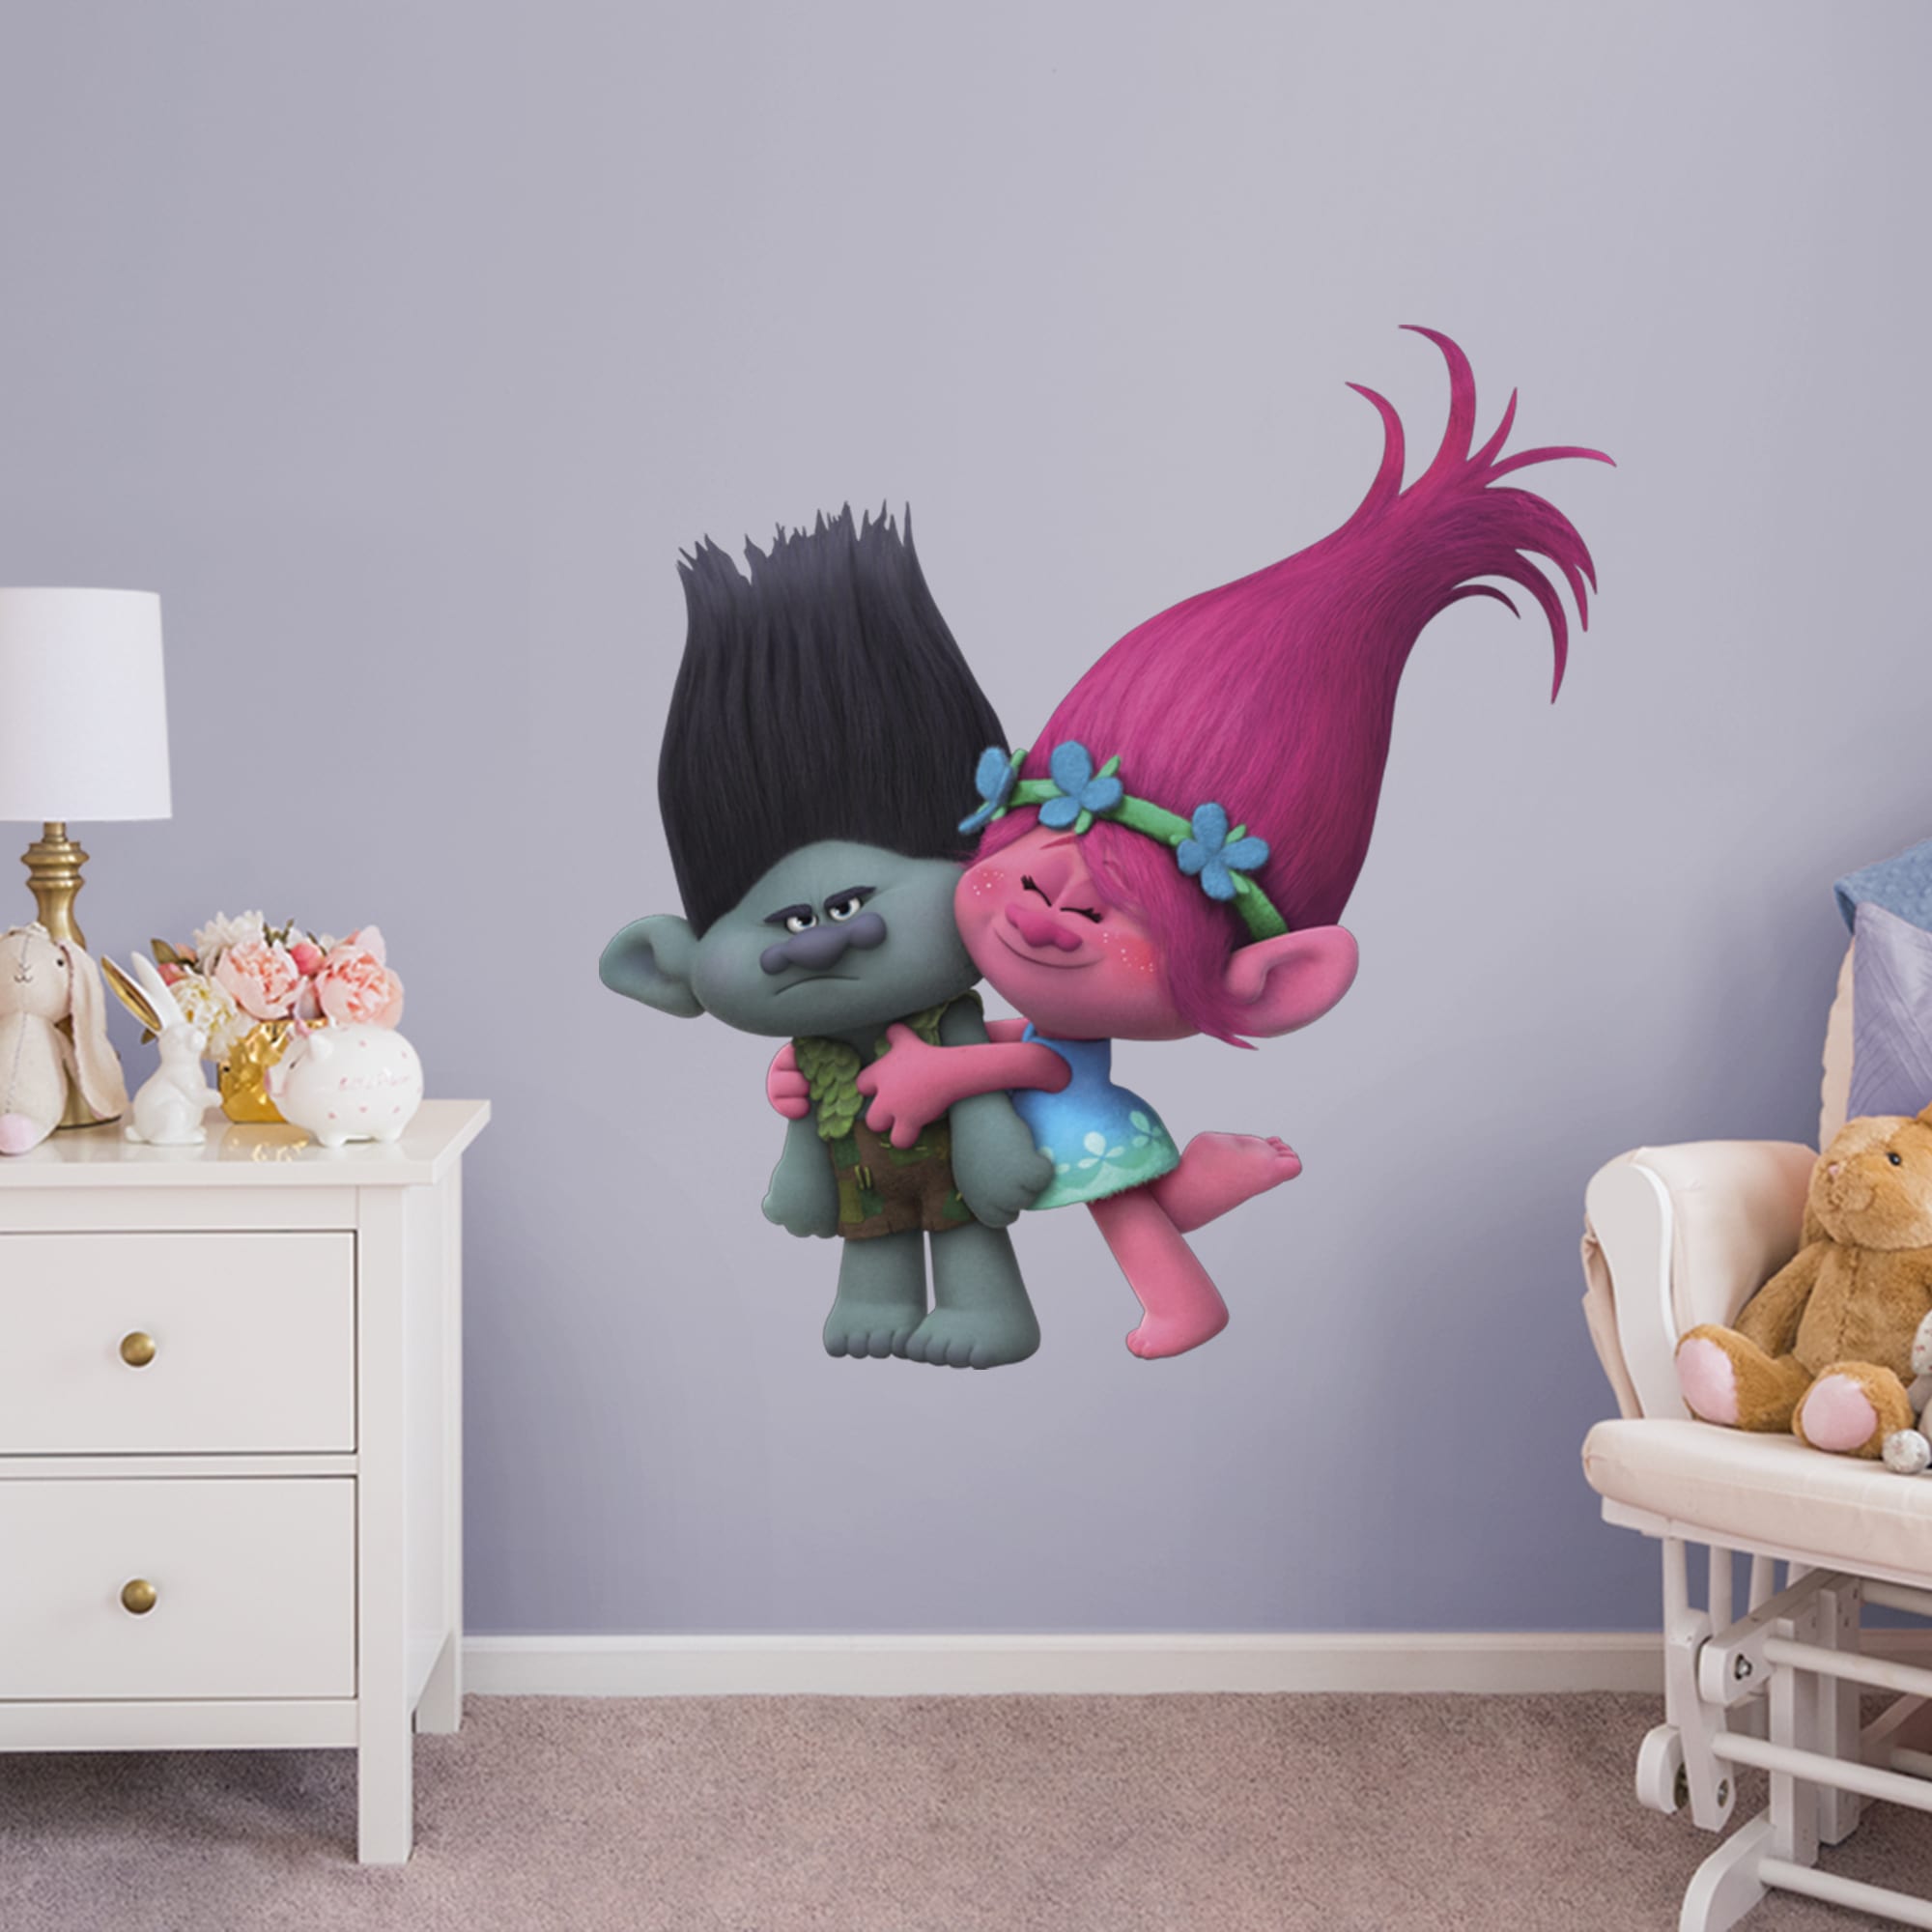 Poppy and Branch - Officially Licensed Trolls Removable Wall Decal Giant Character + 2 Decals (43"W x 44"H) by Fathead | Vinyl